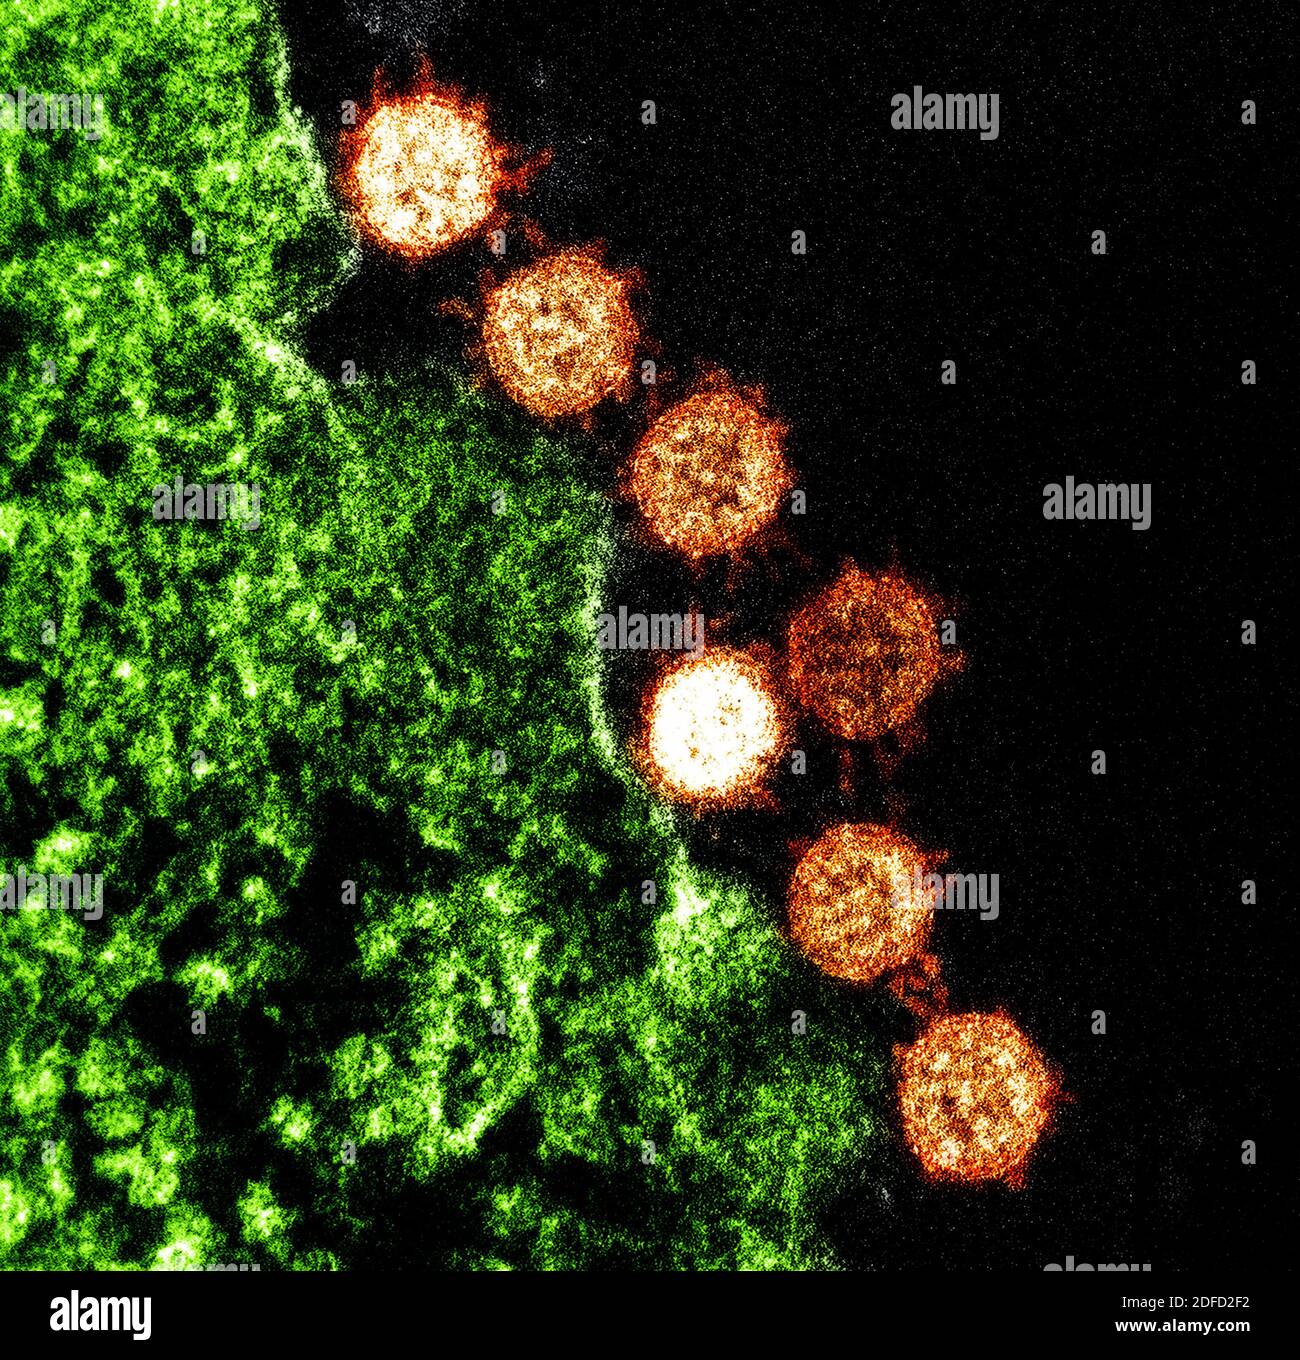 Colorized transmission electron micrograph of Severe Acute Respiratory Syndrome (SARS) virus particles (orange) found near the periphery of an infecte Stock Photo